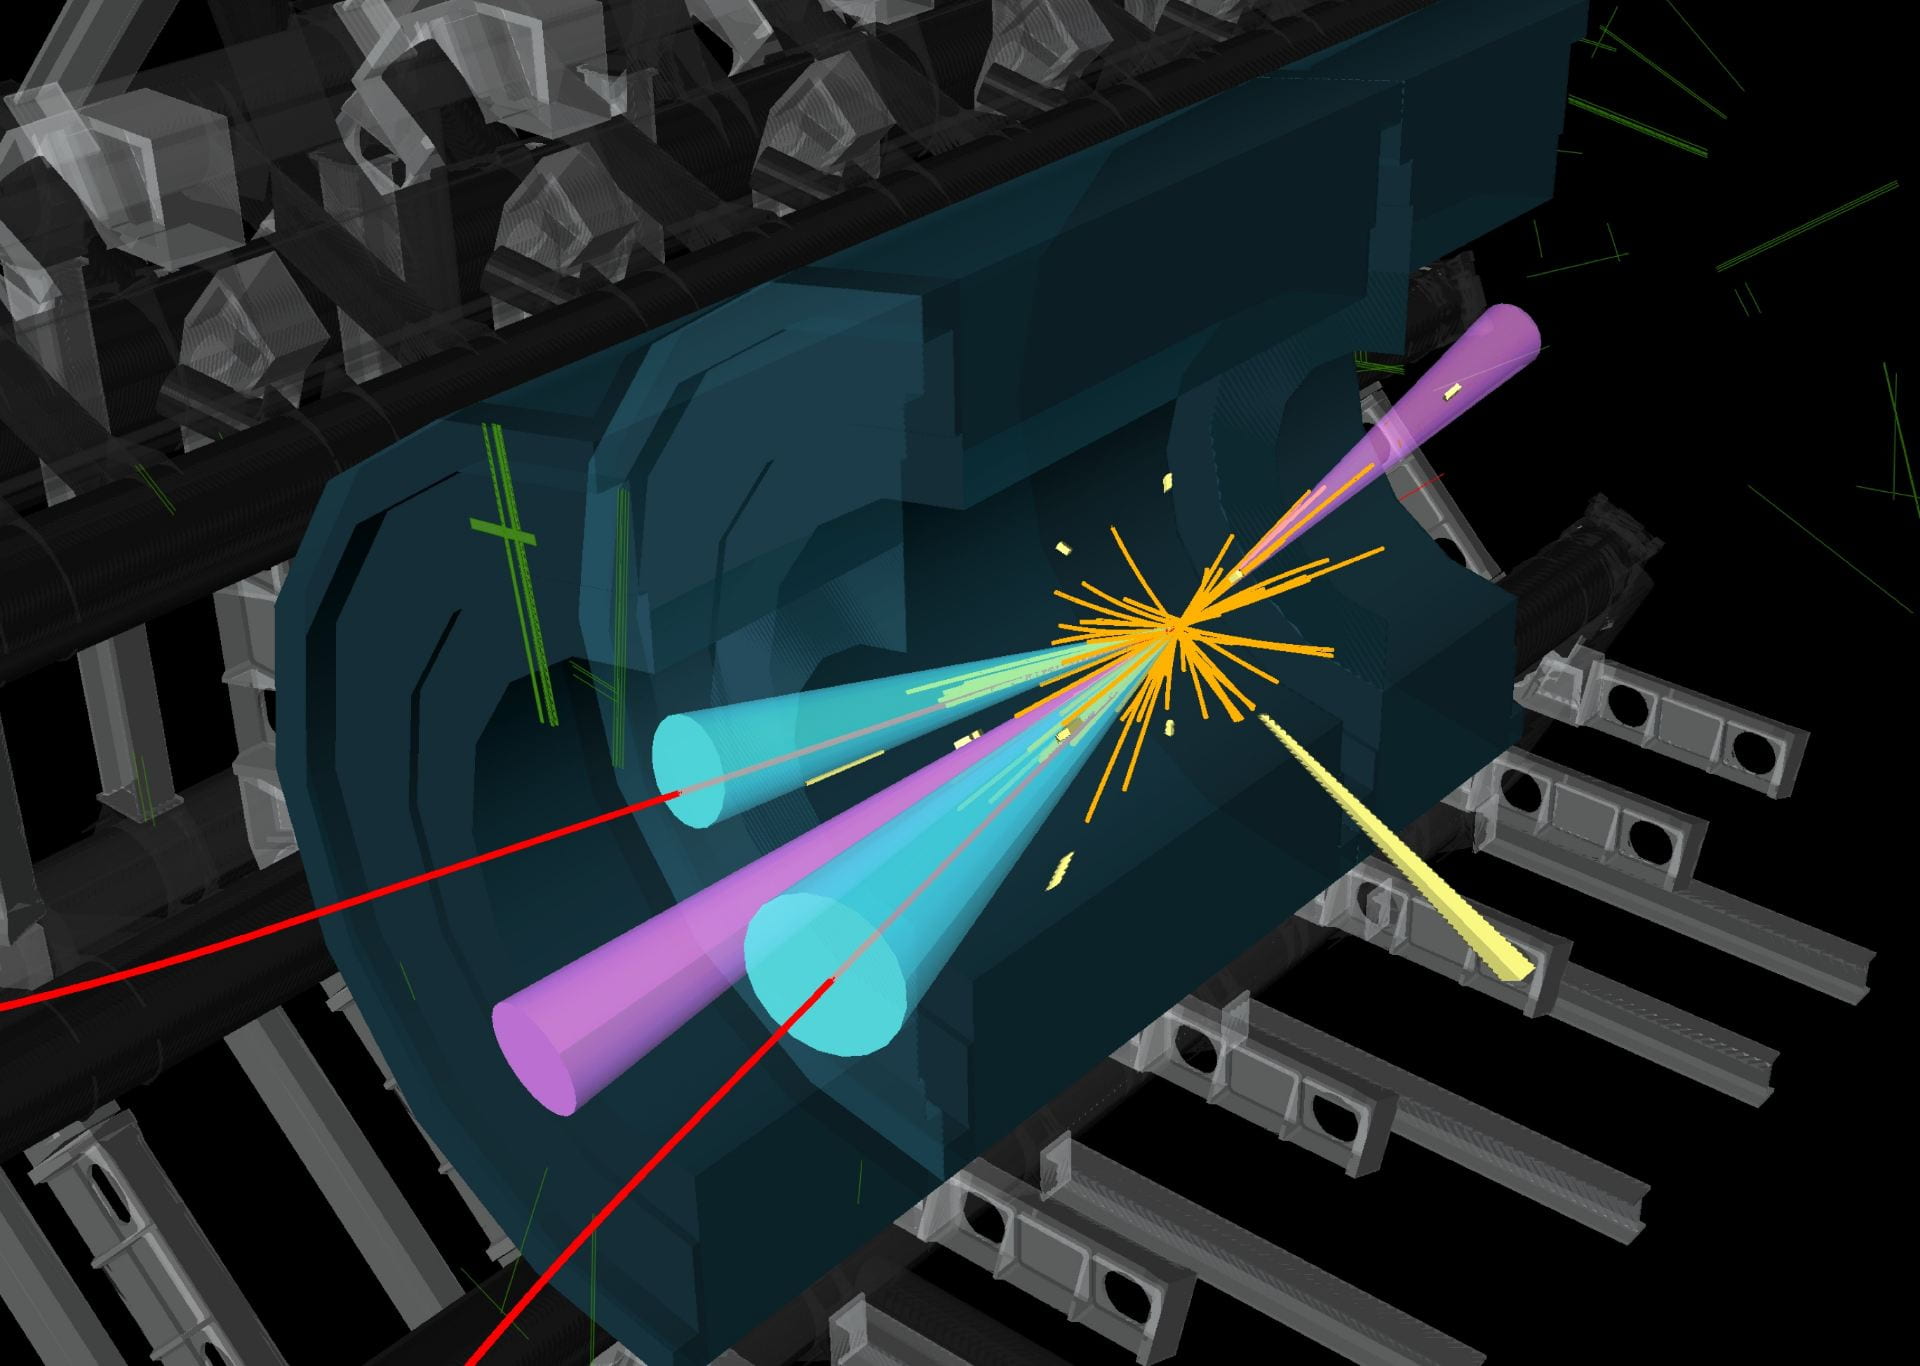 New Higgs boson measurement from the ATLAS Collaboration at CERN.